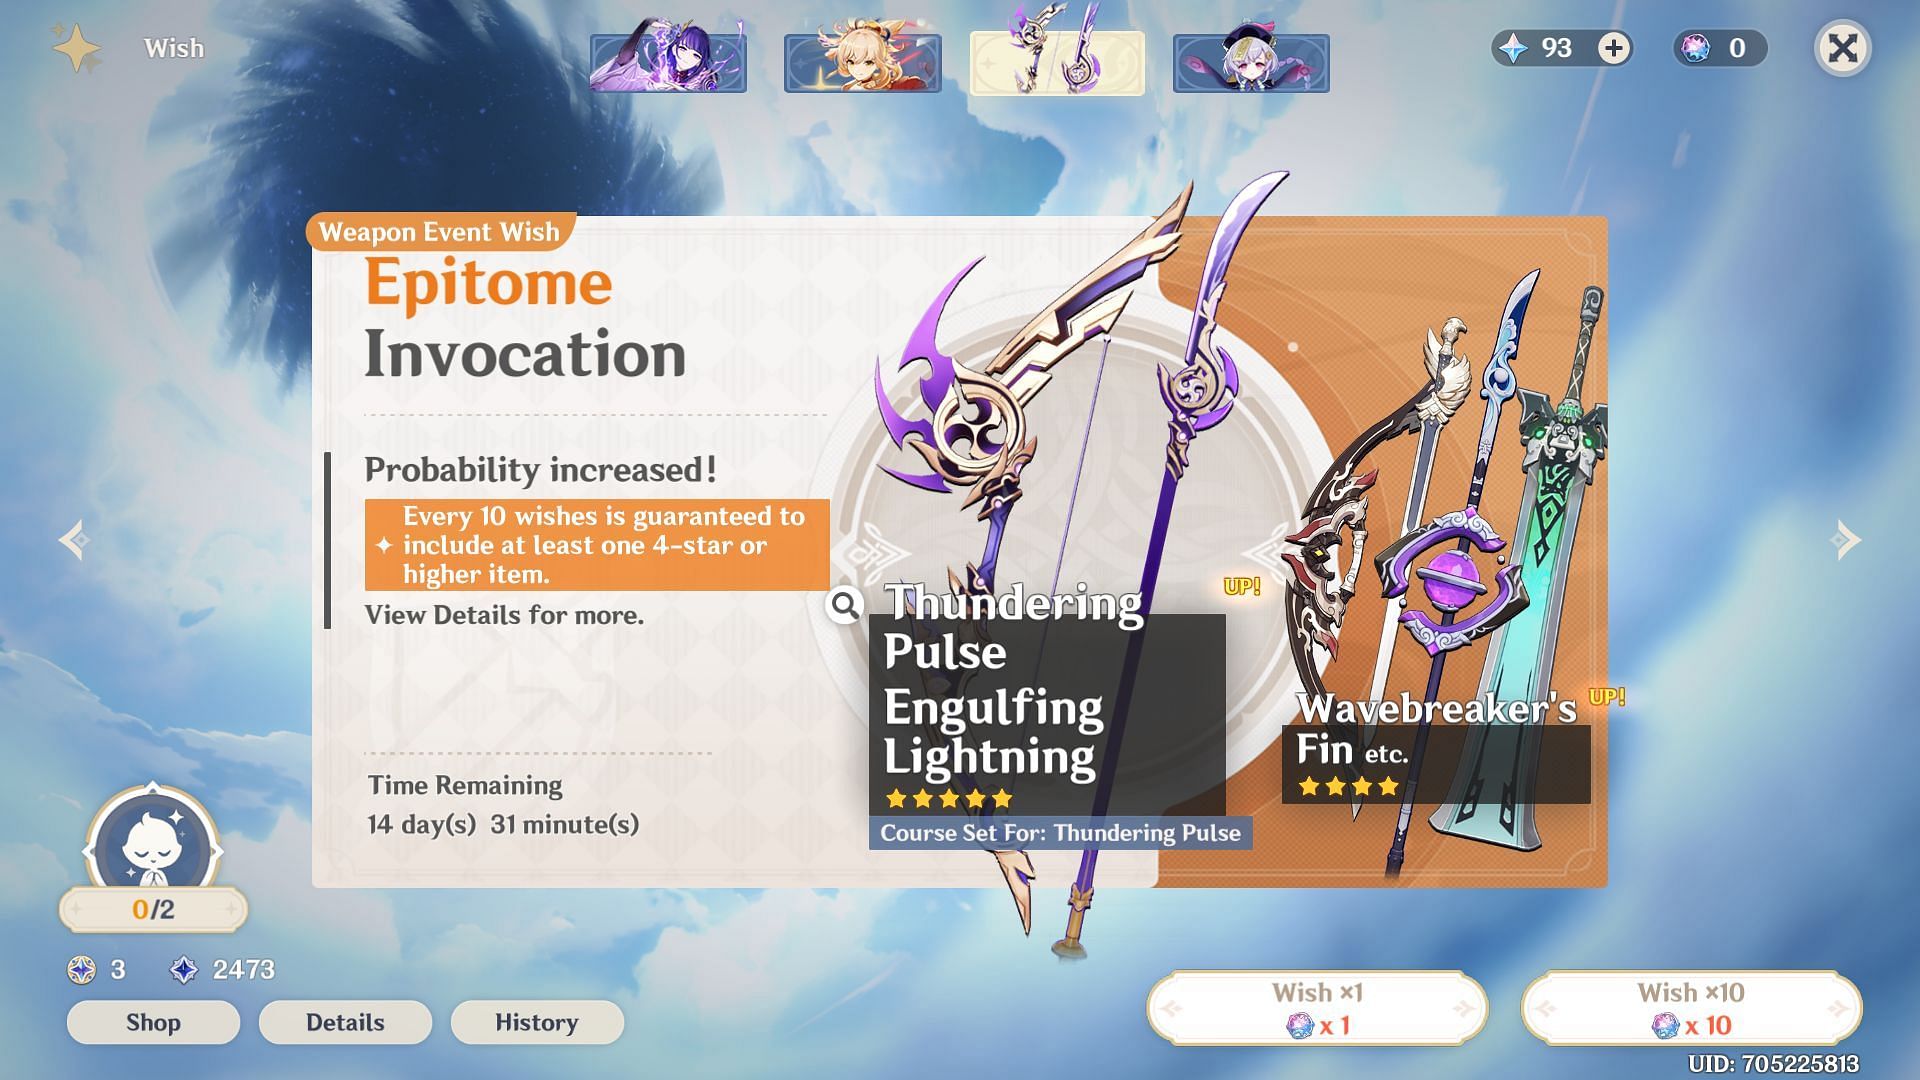 Epitome Invocation weapons banner (Image via HoYoverse)